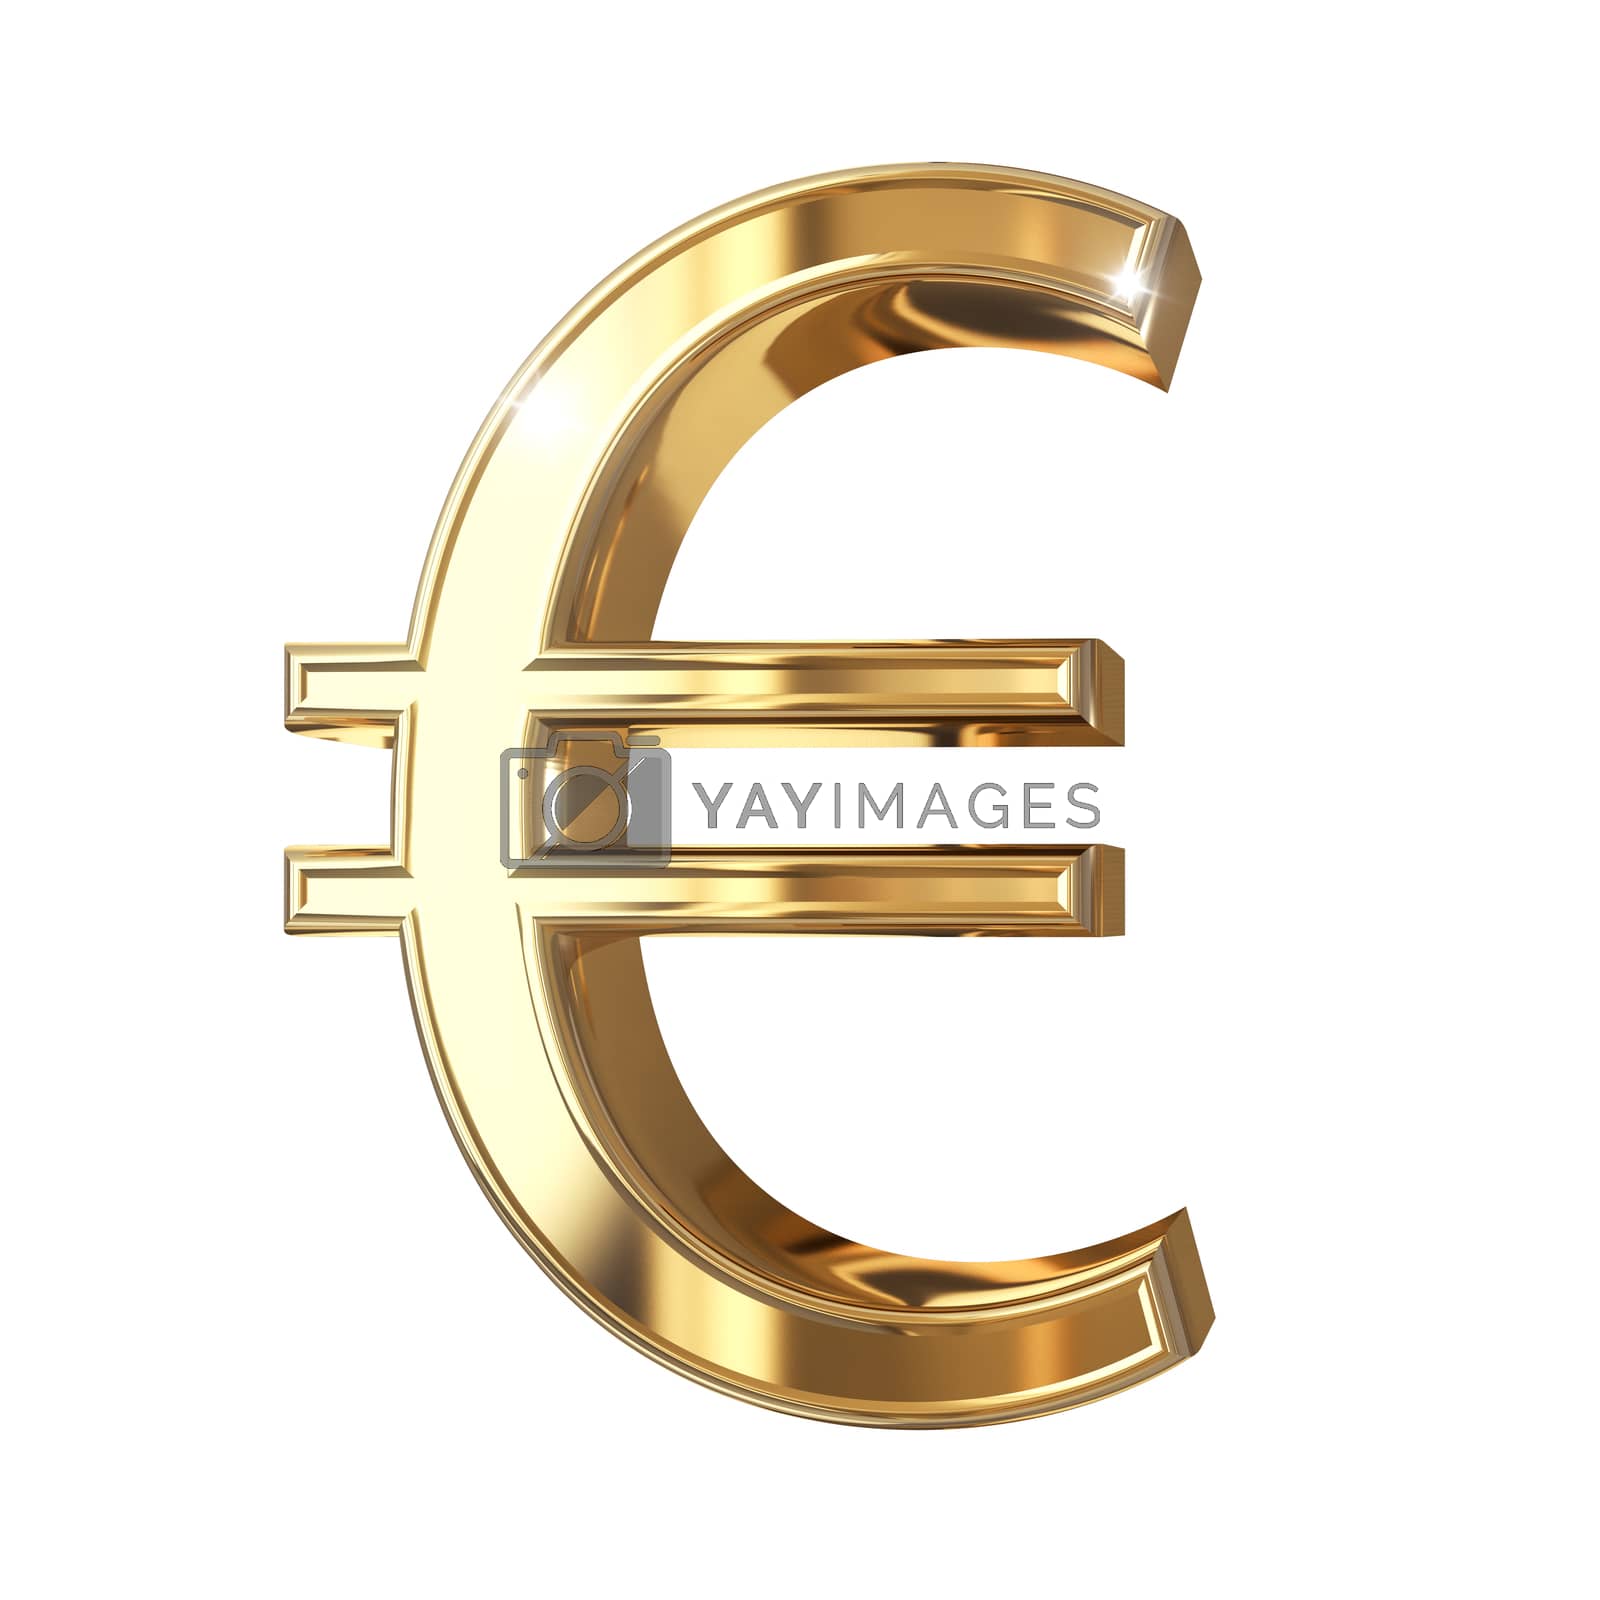 Royalty free image of Golden Euro currency - isolated on white by 123dartist